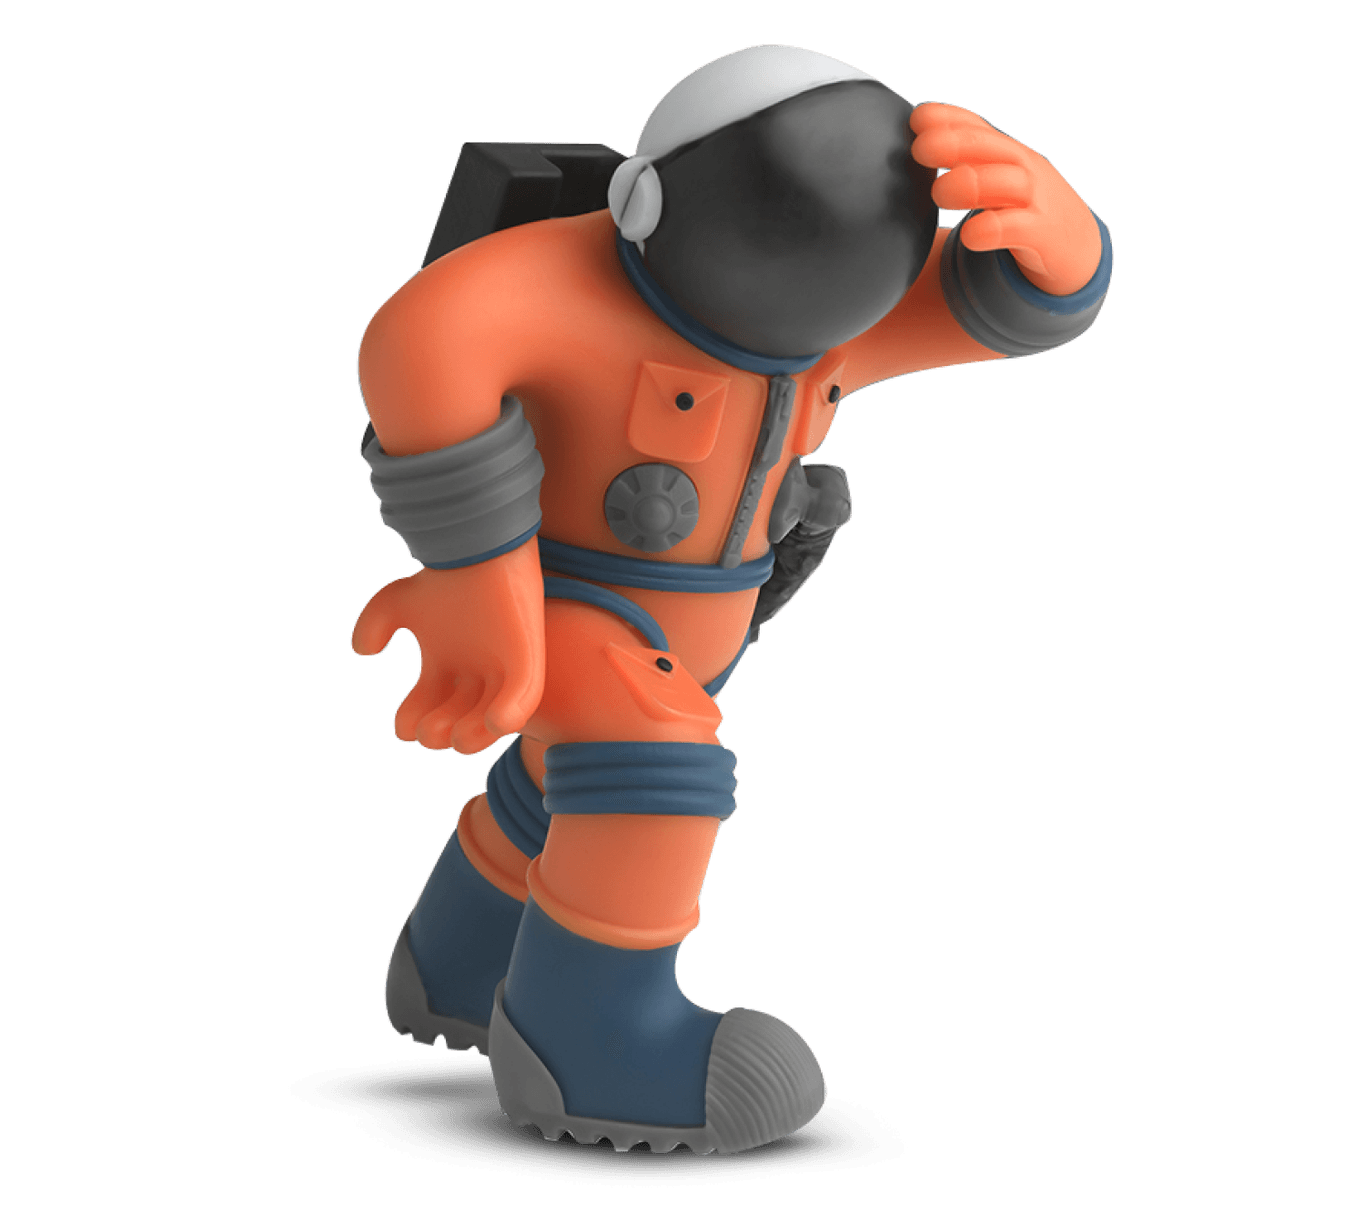 Color Kit Resin Astronaut in grey shades, orange and blue